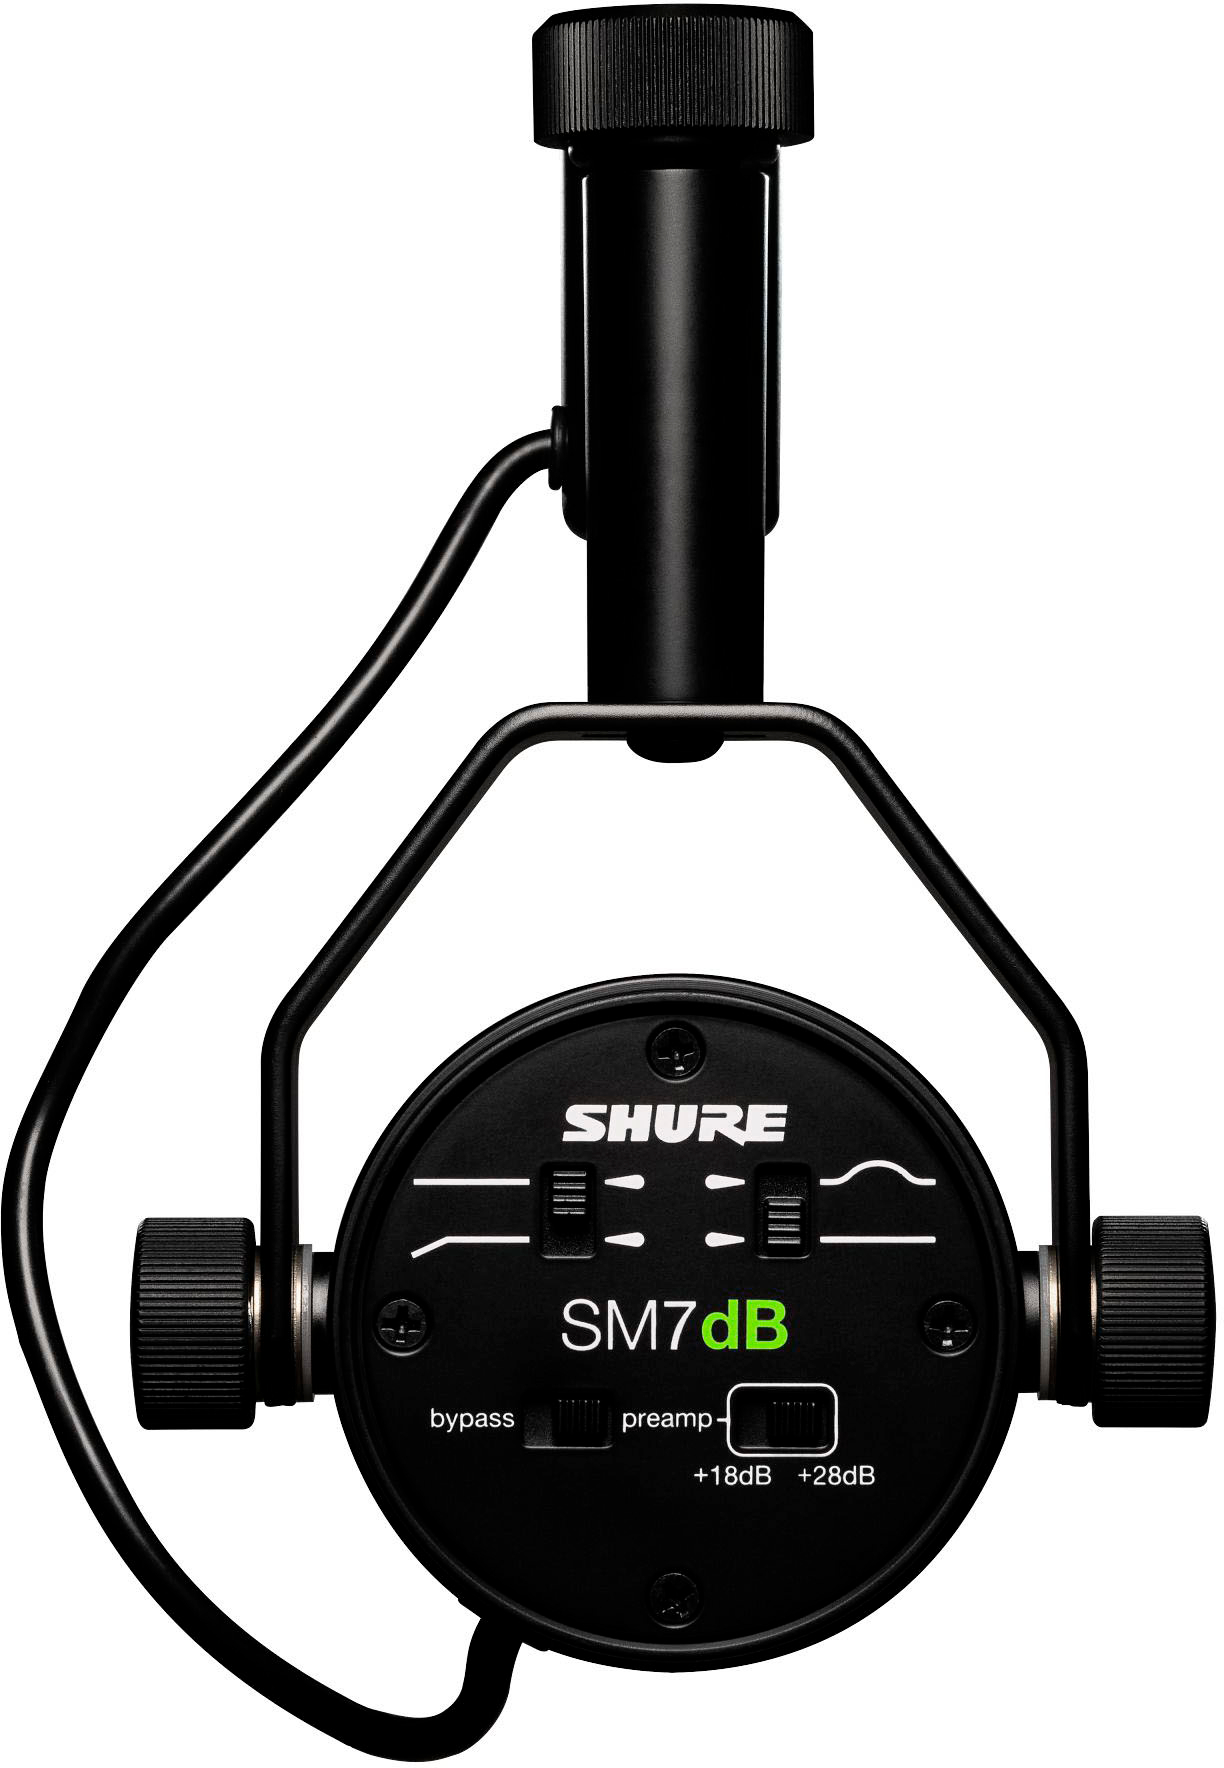 Shure - SM7dB - Dynamic Vocal Microphone with Built-In Preamp